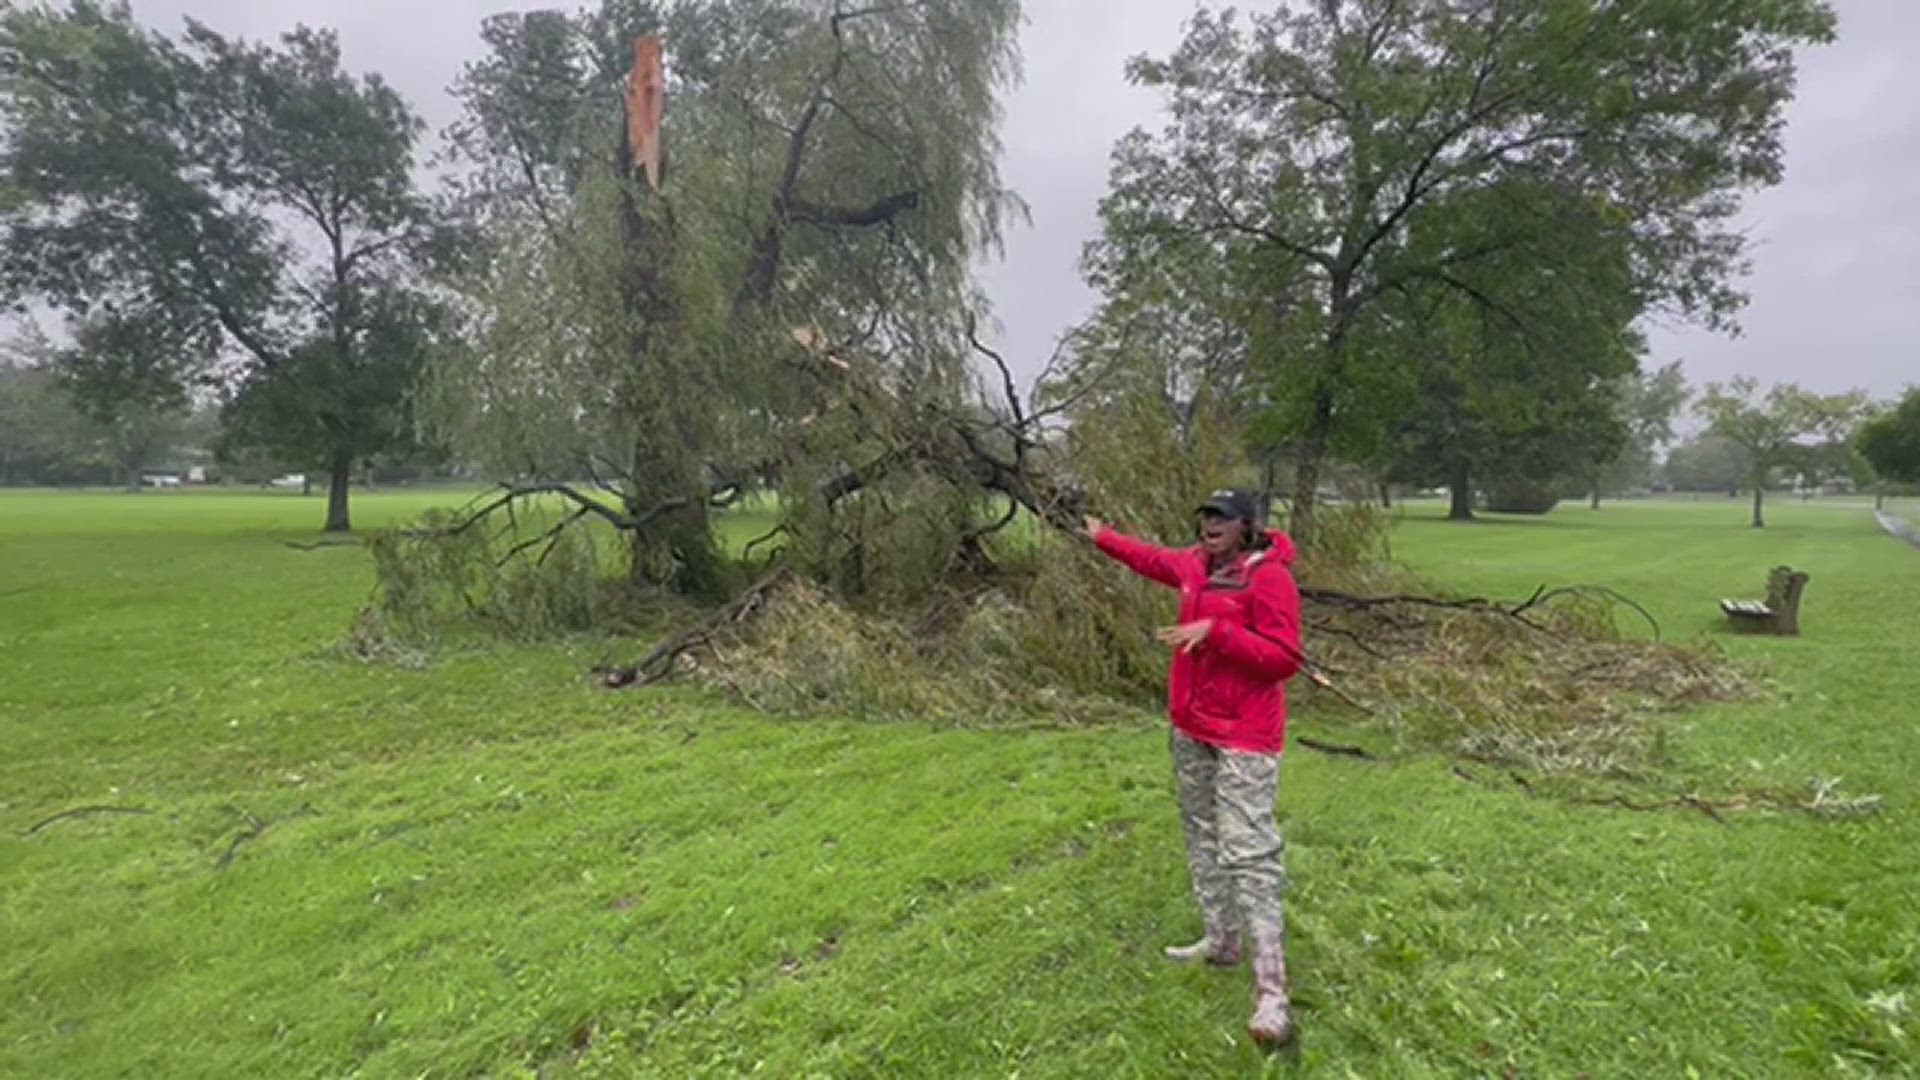 NEWS CENTER Maine's Rya Wooten reports Saturday morning from Bangor showing a tree that had broken because of the wind and rain.